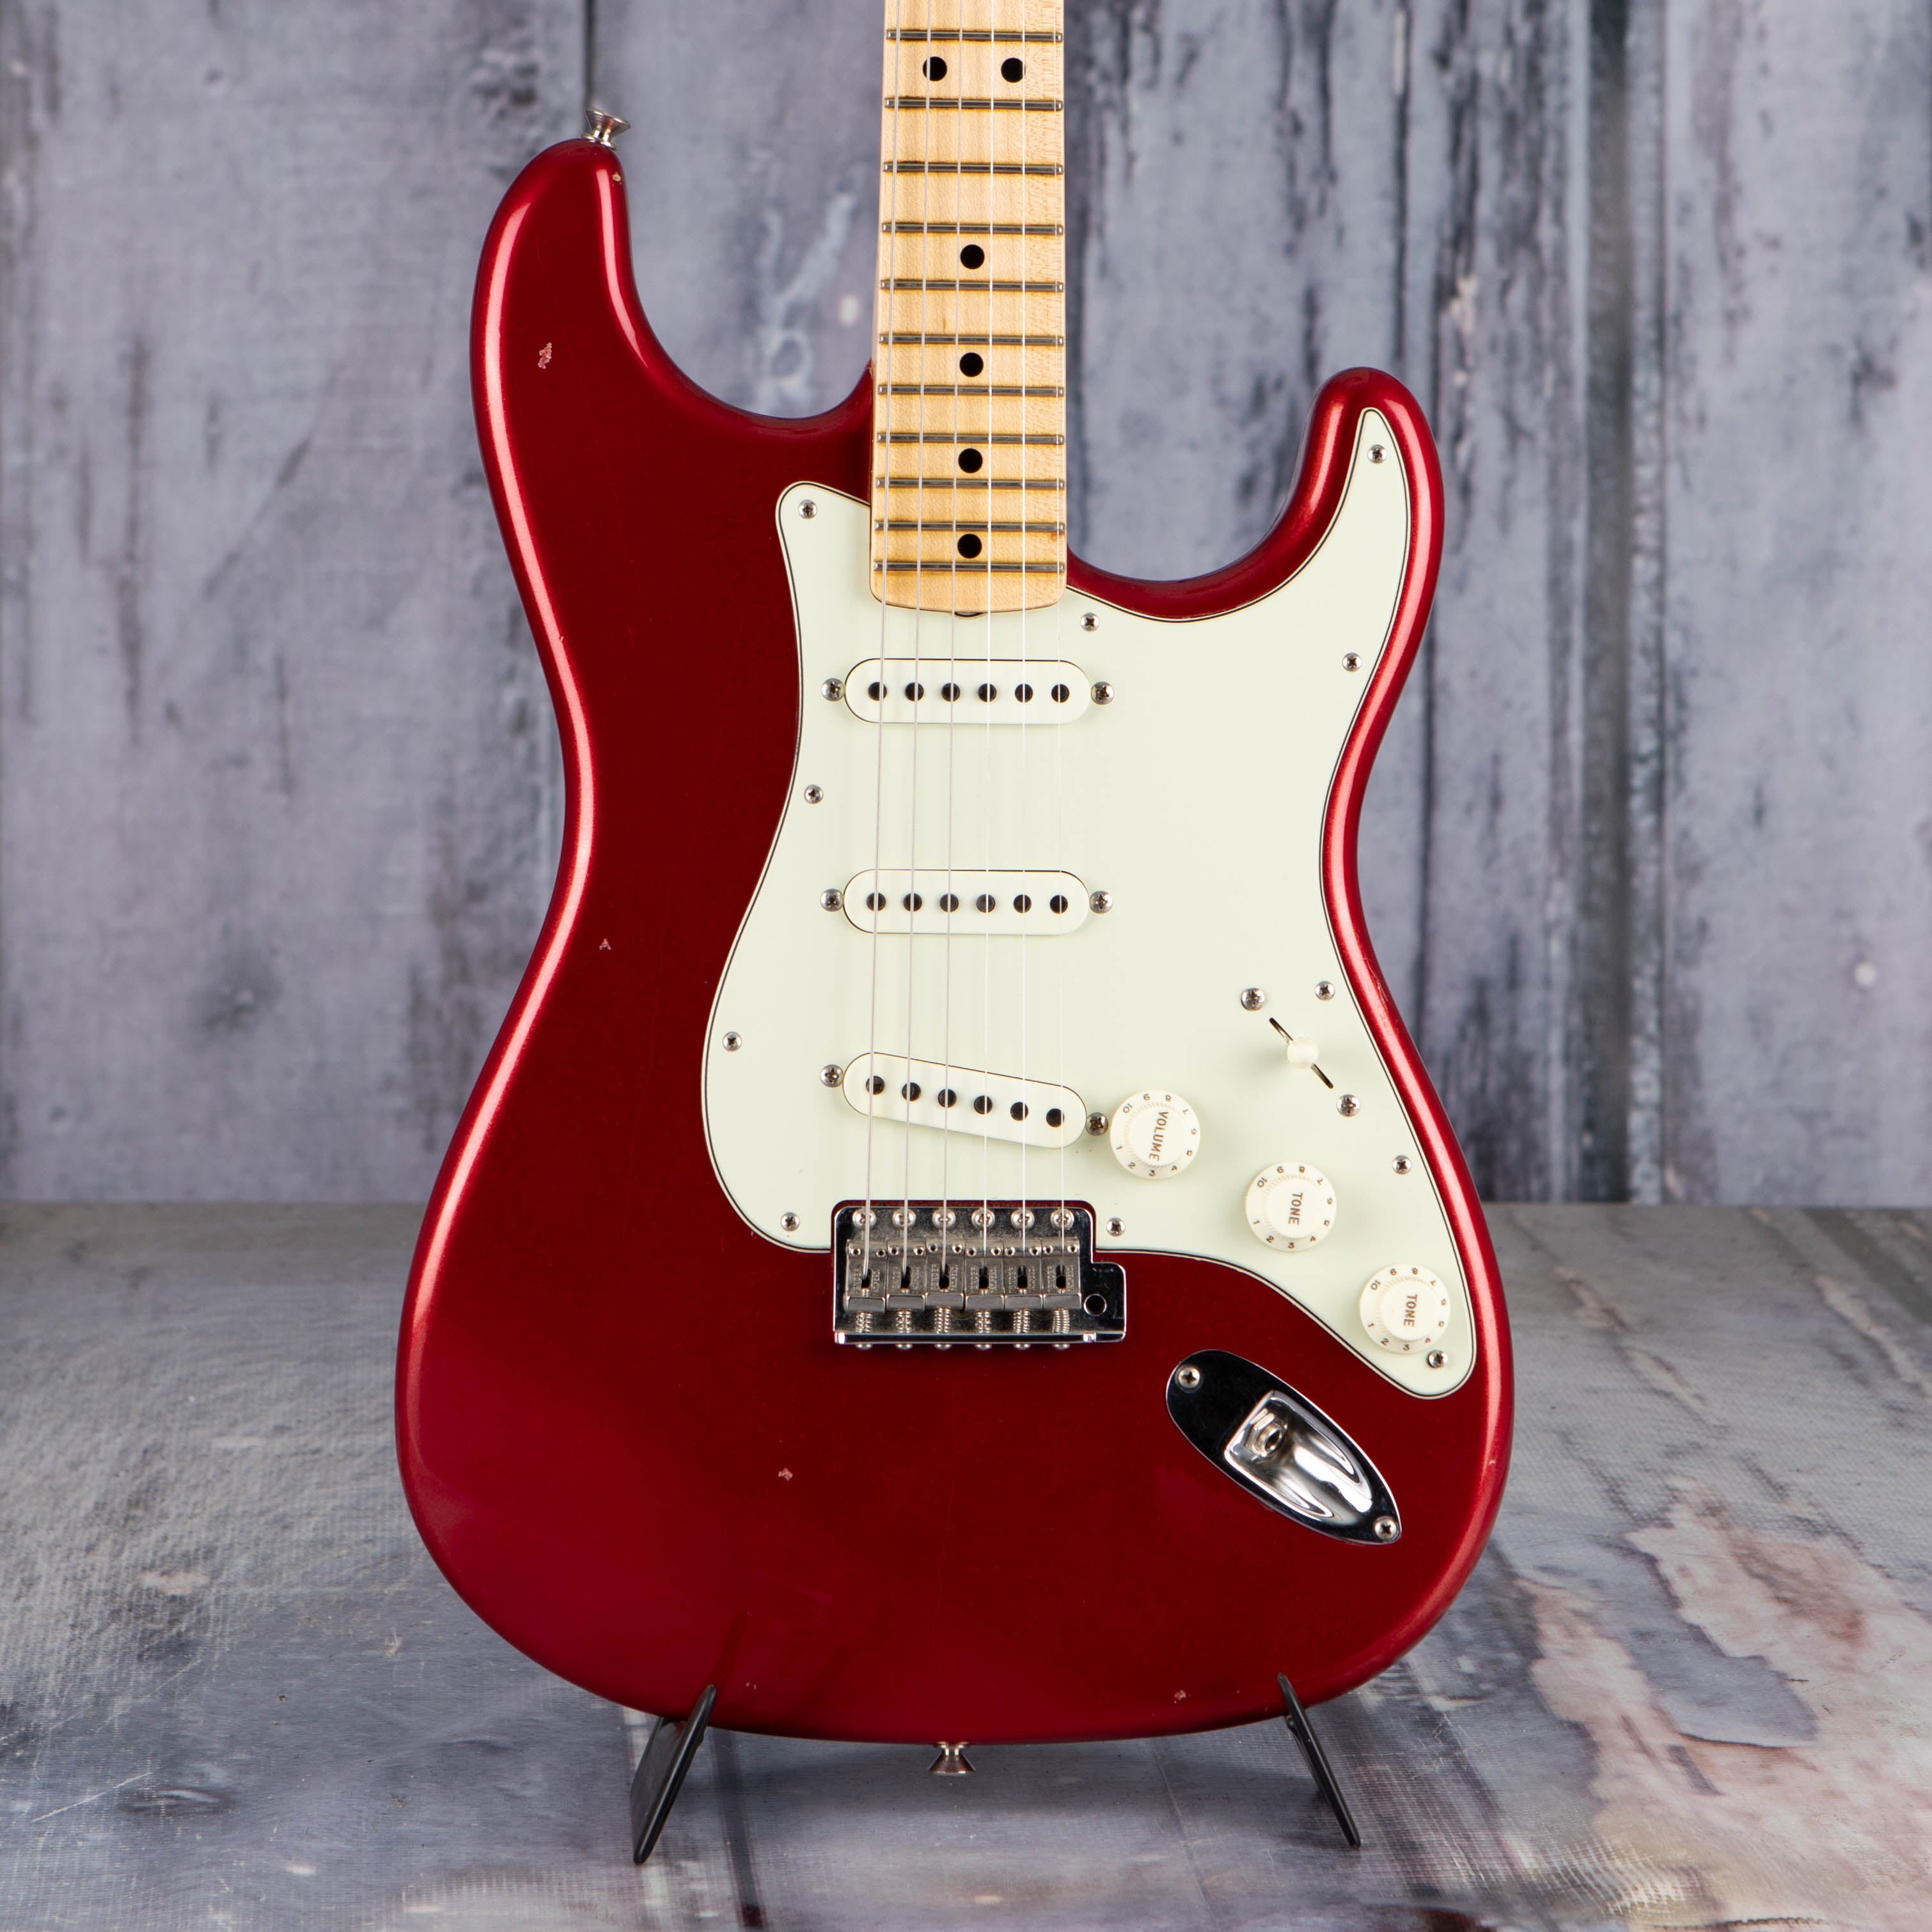 Used Fender Custom Shop 70 Stratocaster Journeyman Relic Closet Classic Electric Guitar, Aged Firemist Red, front closeup